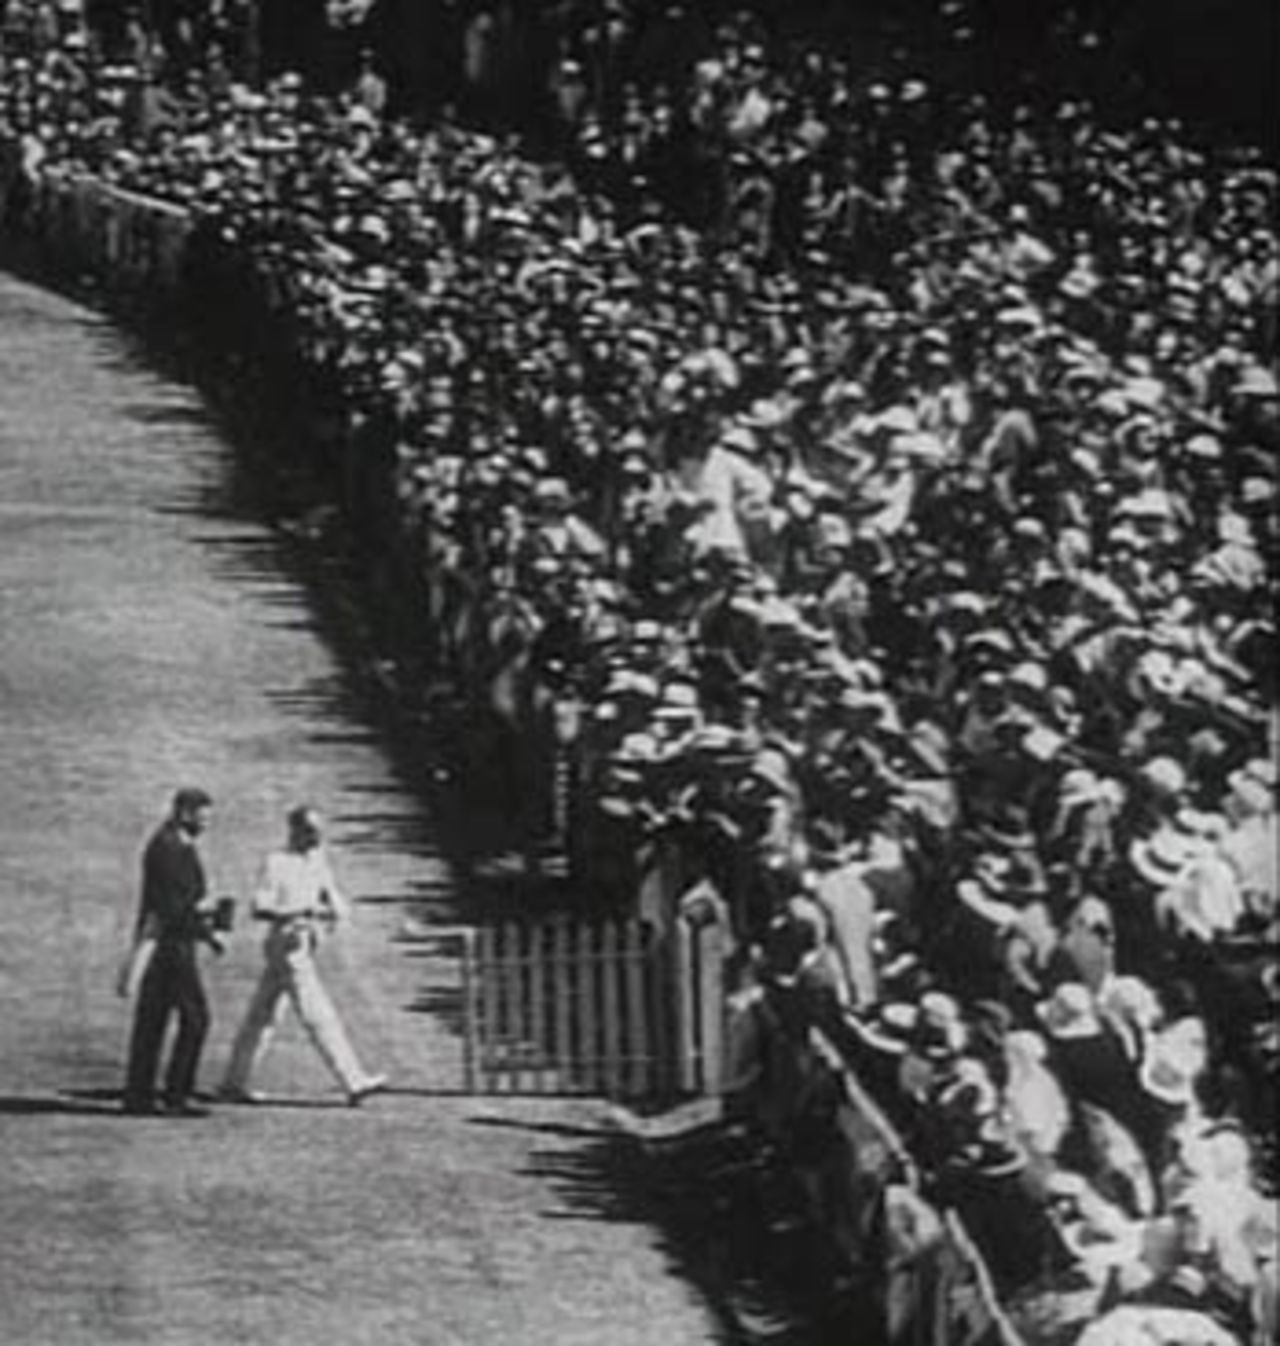 Bert Oldfield is helped off the pitch by Bill Woodfull after being struck by Harold Larwood, Australia v England, 3rd Test, Adelaide, January 16, 1933